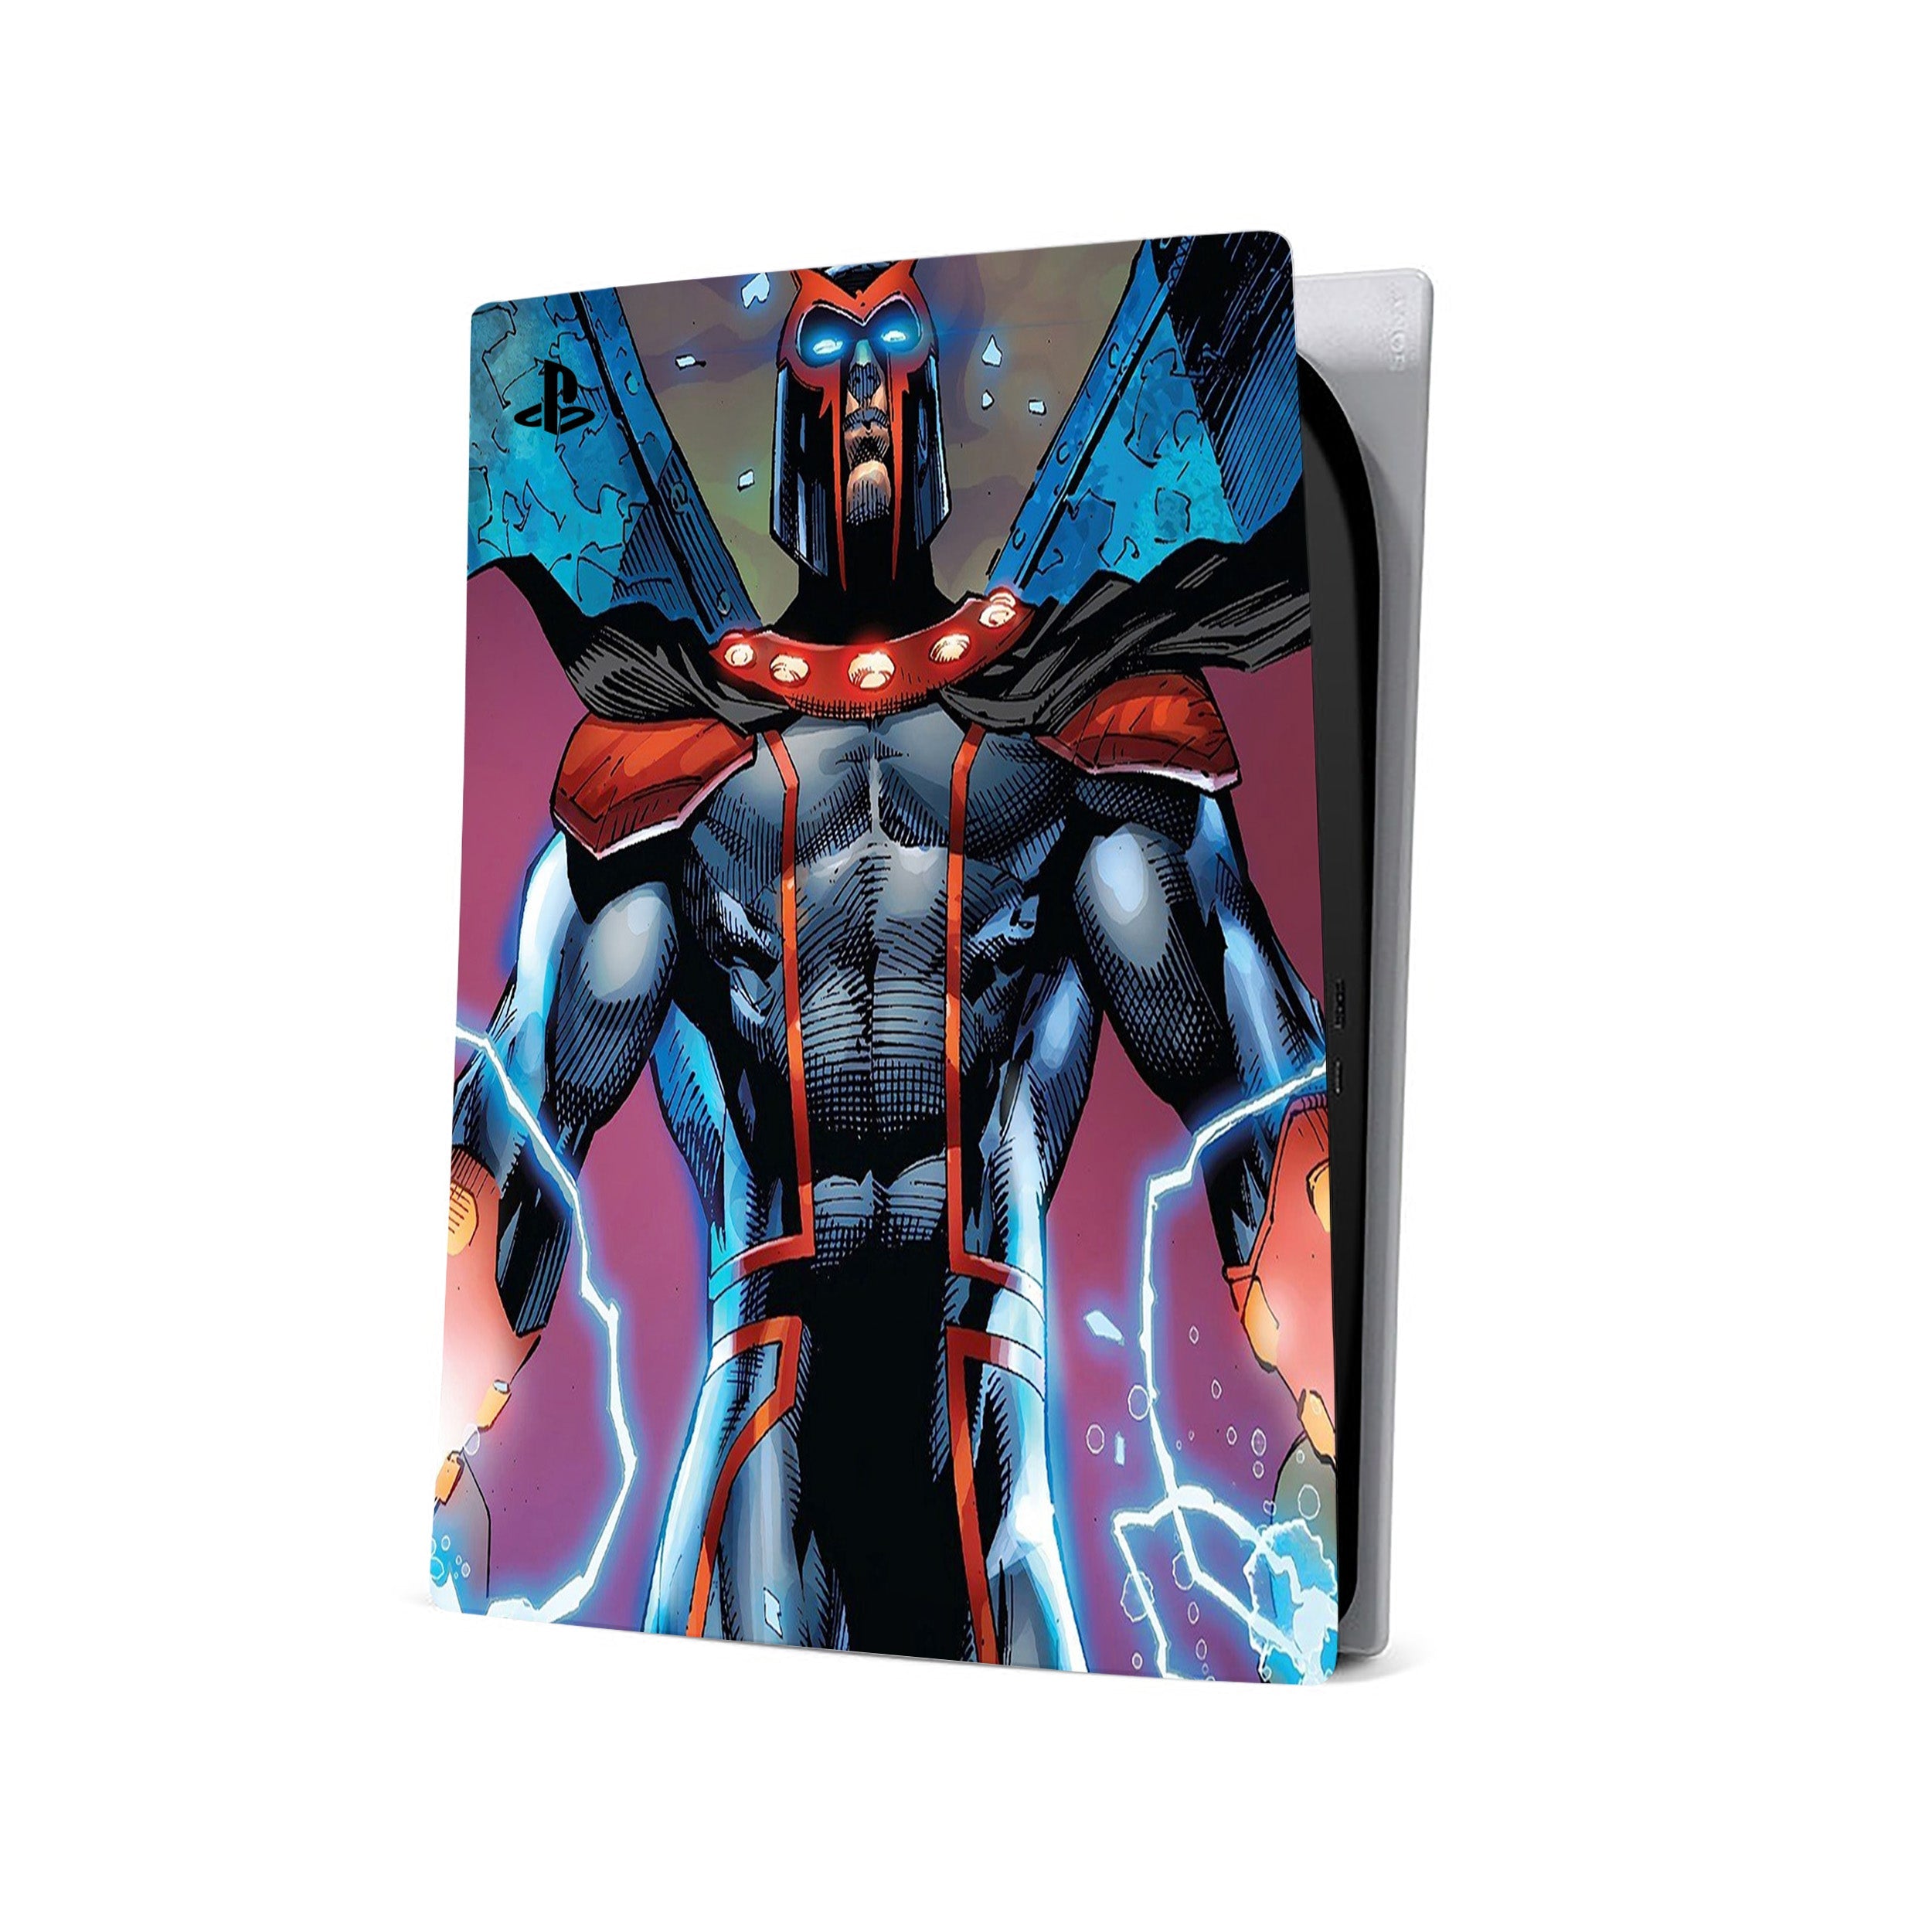 A video game skin featuring a Marvel Comics X Men Magneto design for the PS5.